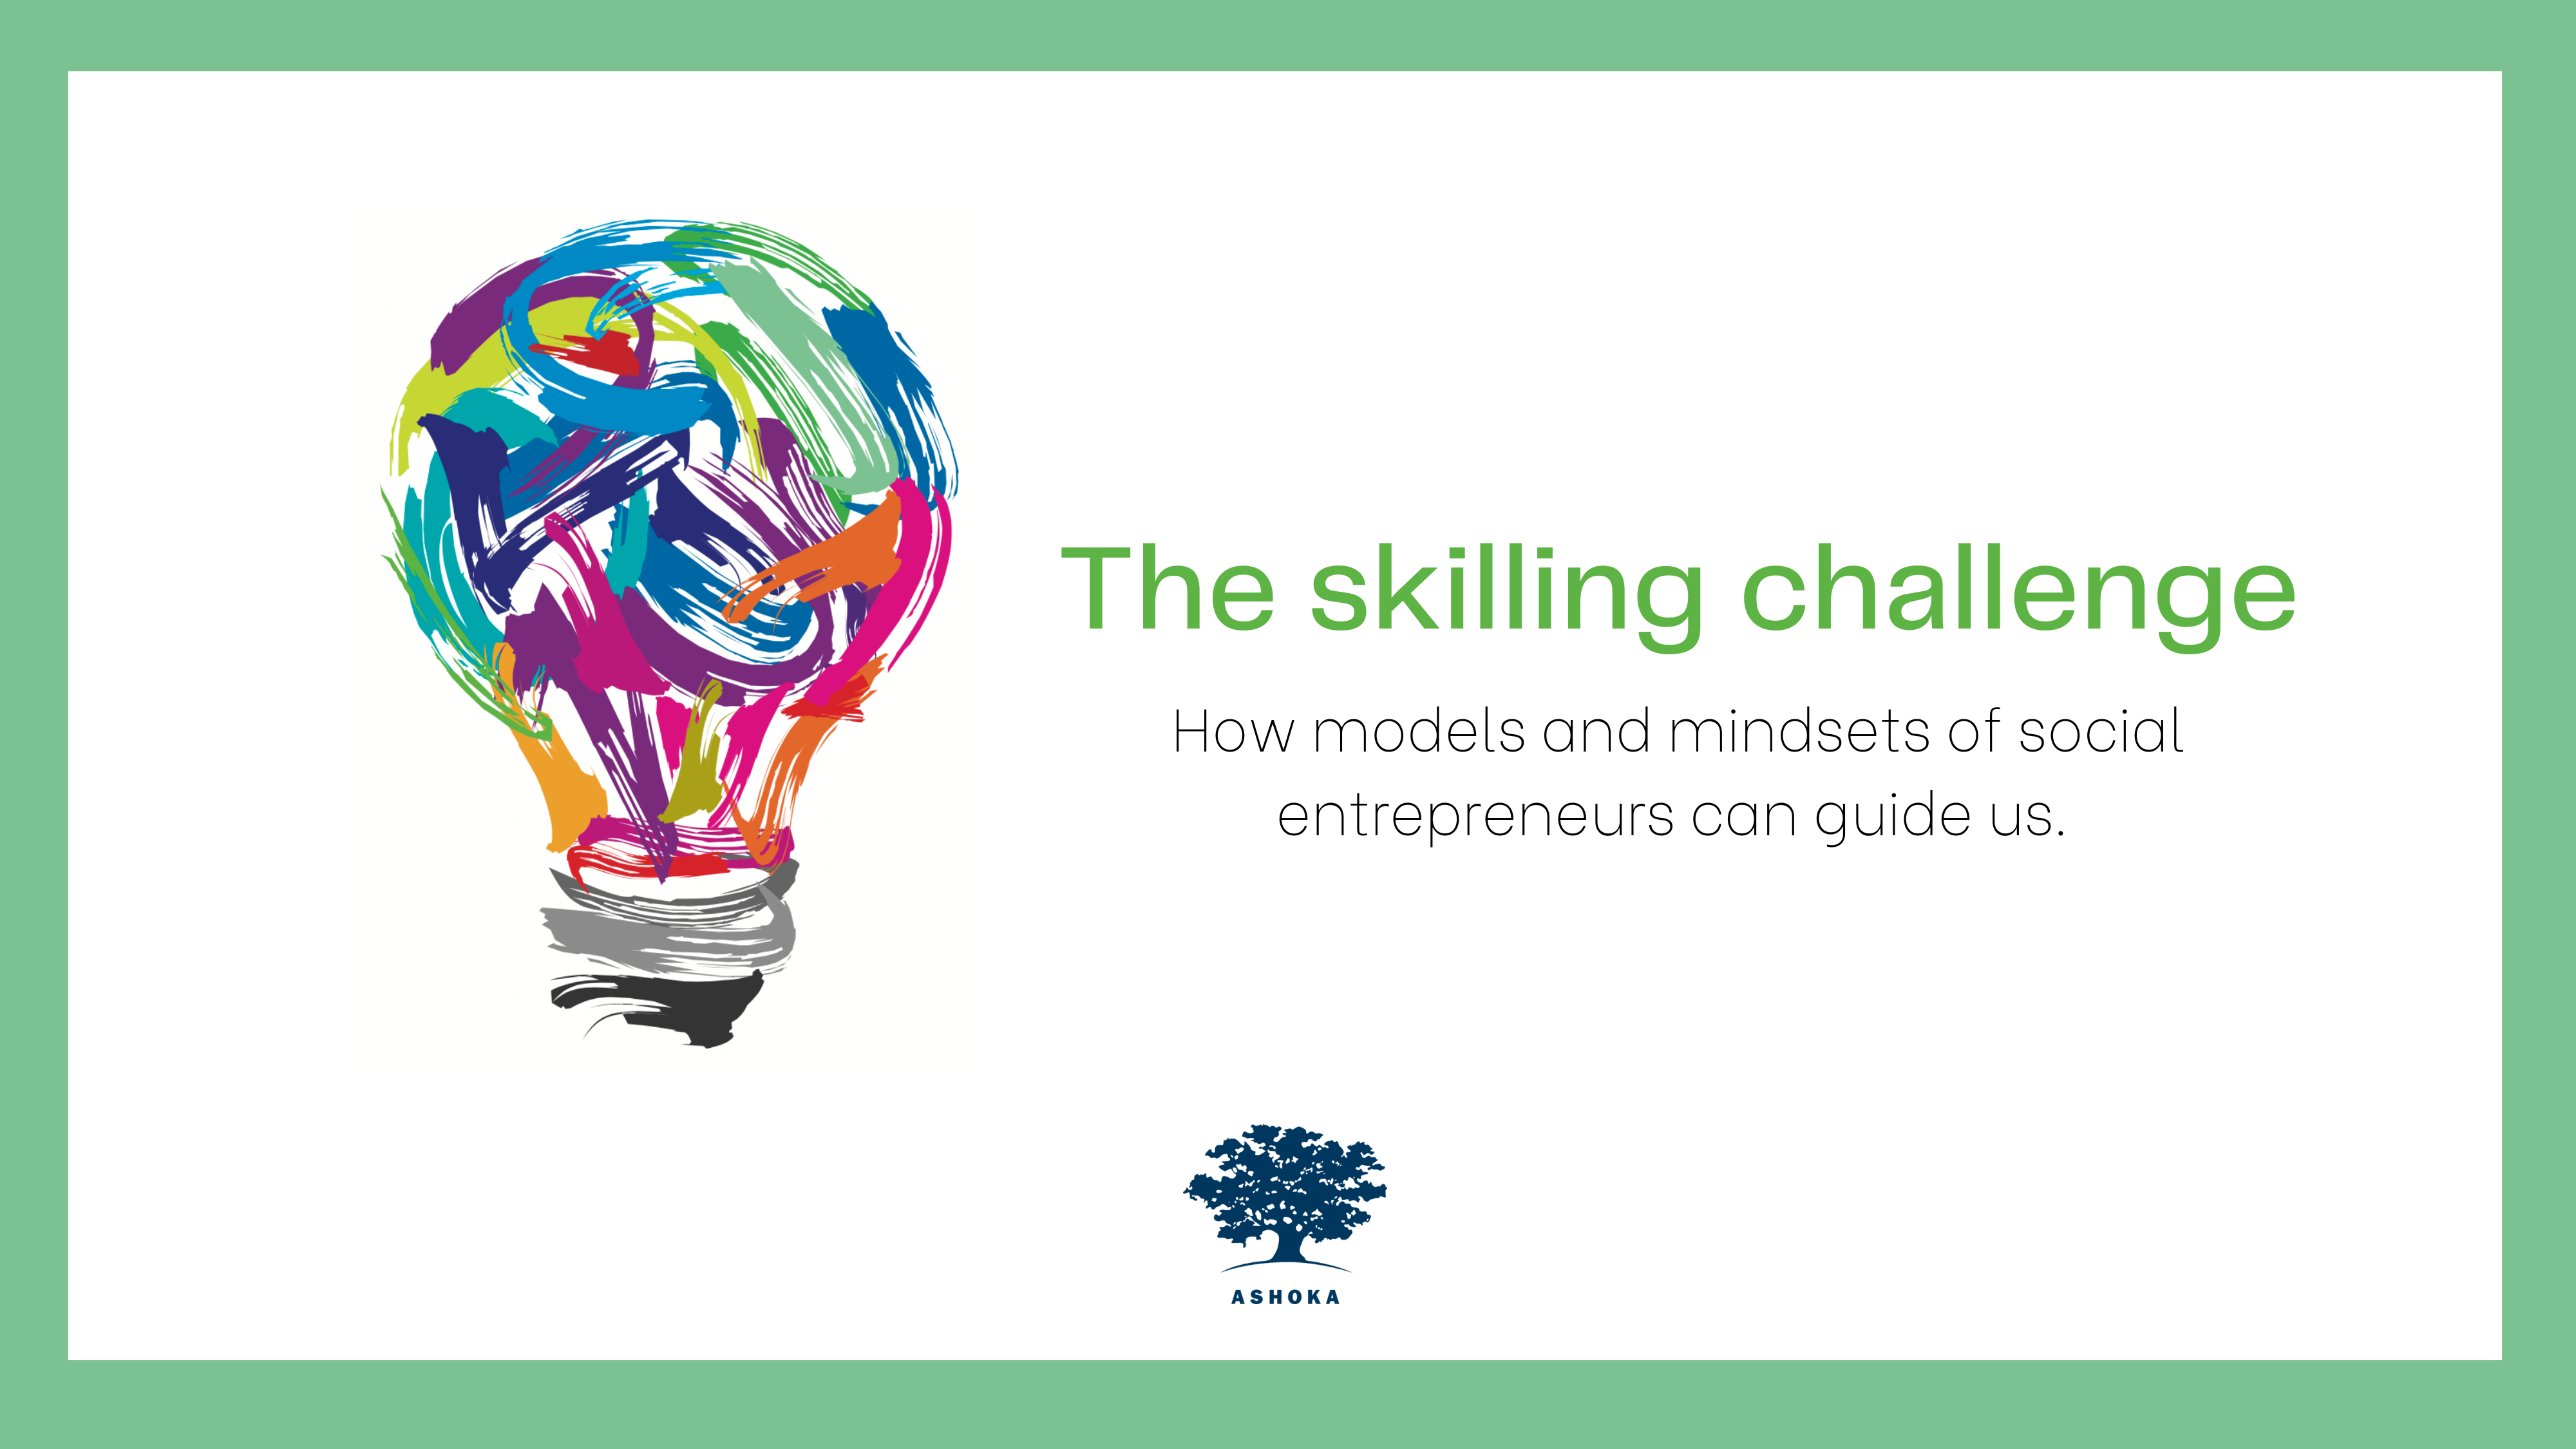 The skilling challenge - how models and mindsets of social entrepreneurs can guide us